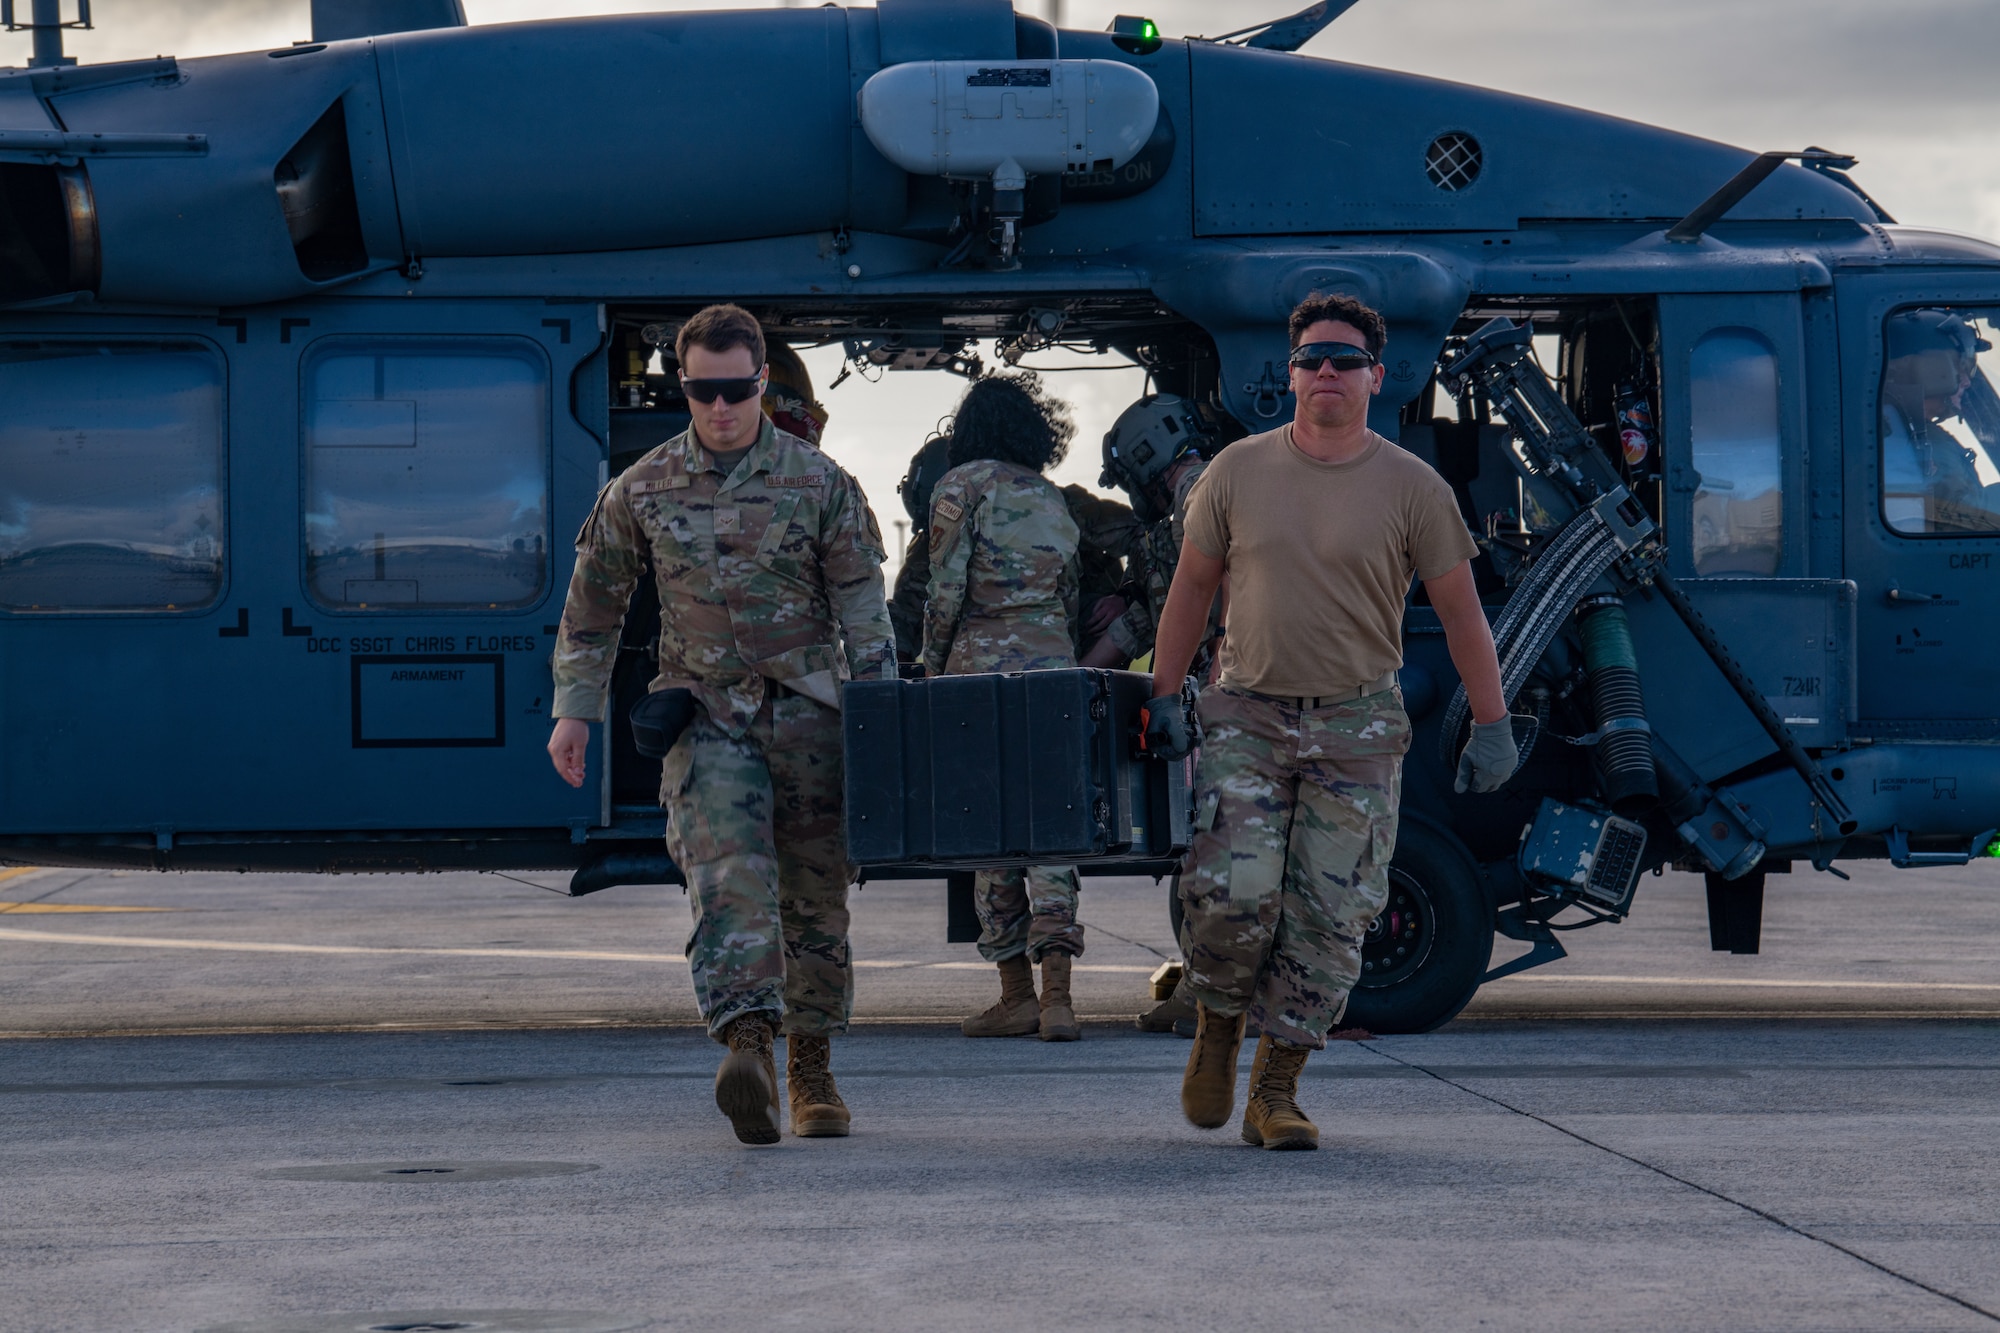 Airmen carry a case away from a helicopter.